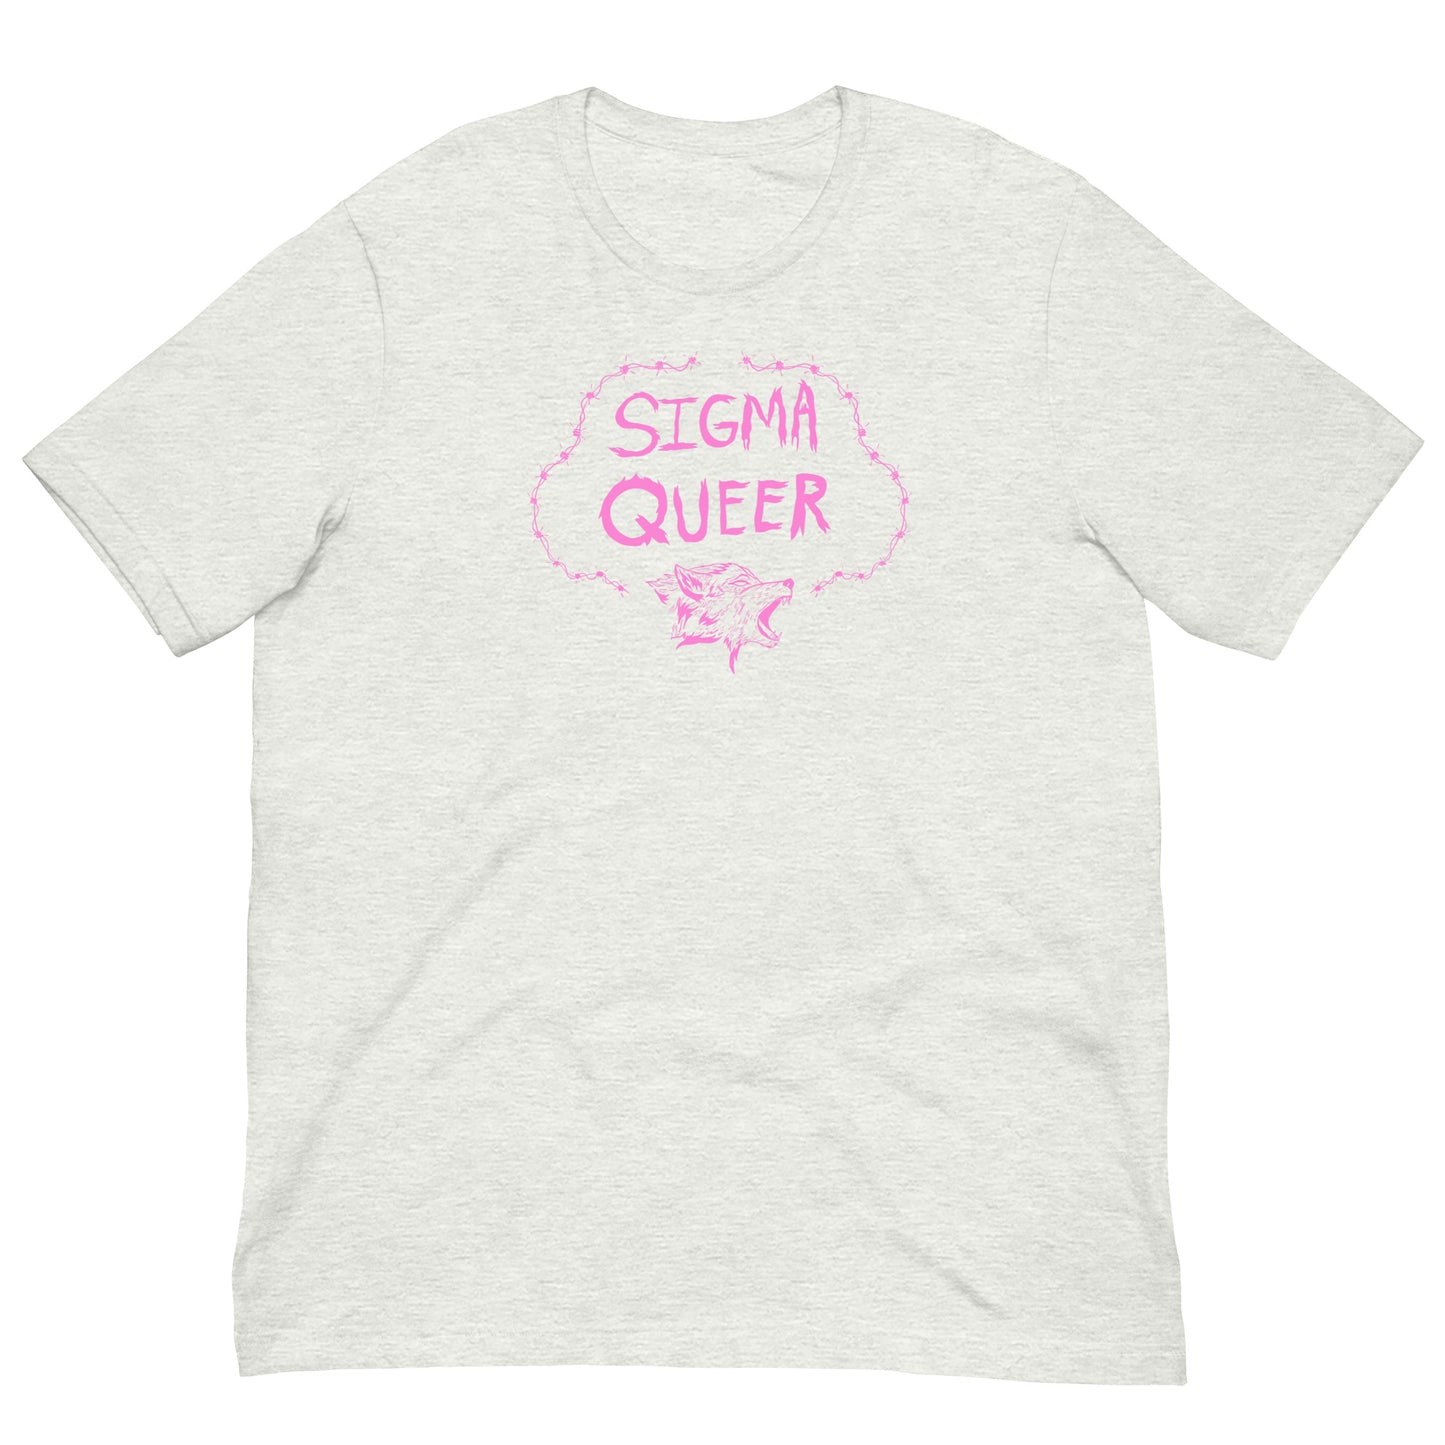 Sigma Queer Tee